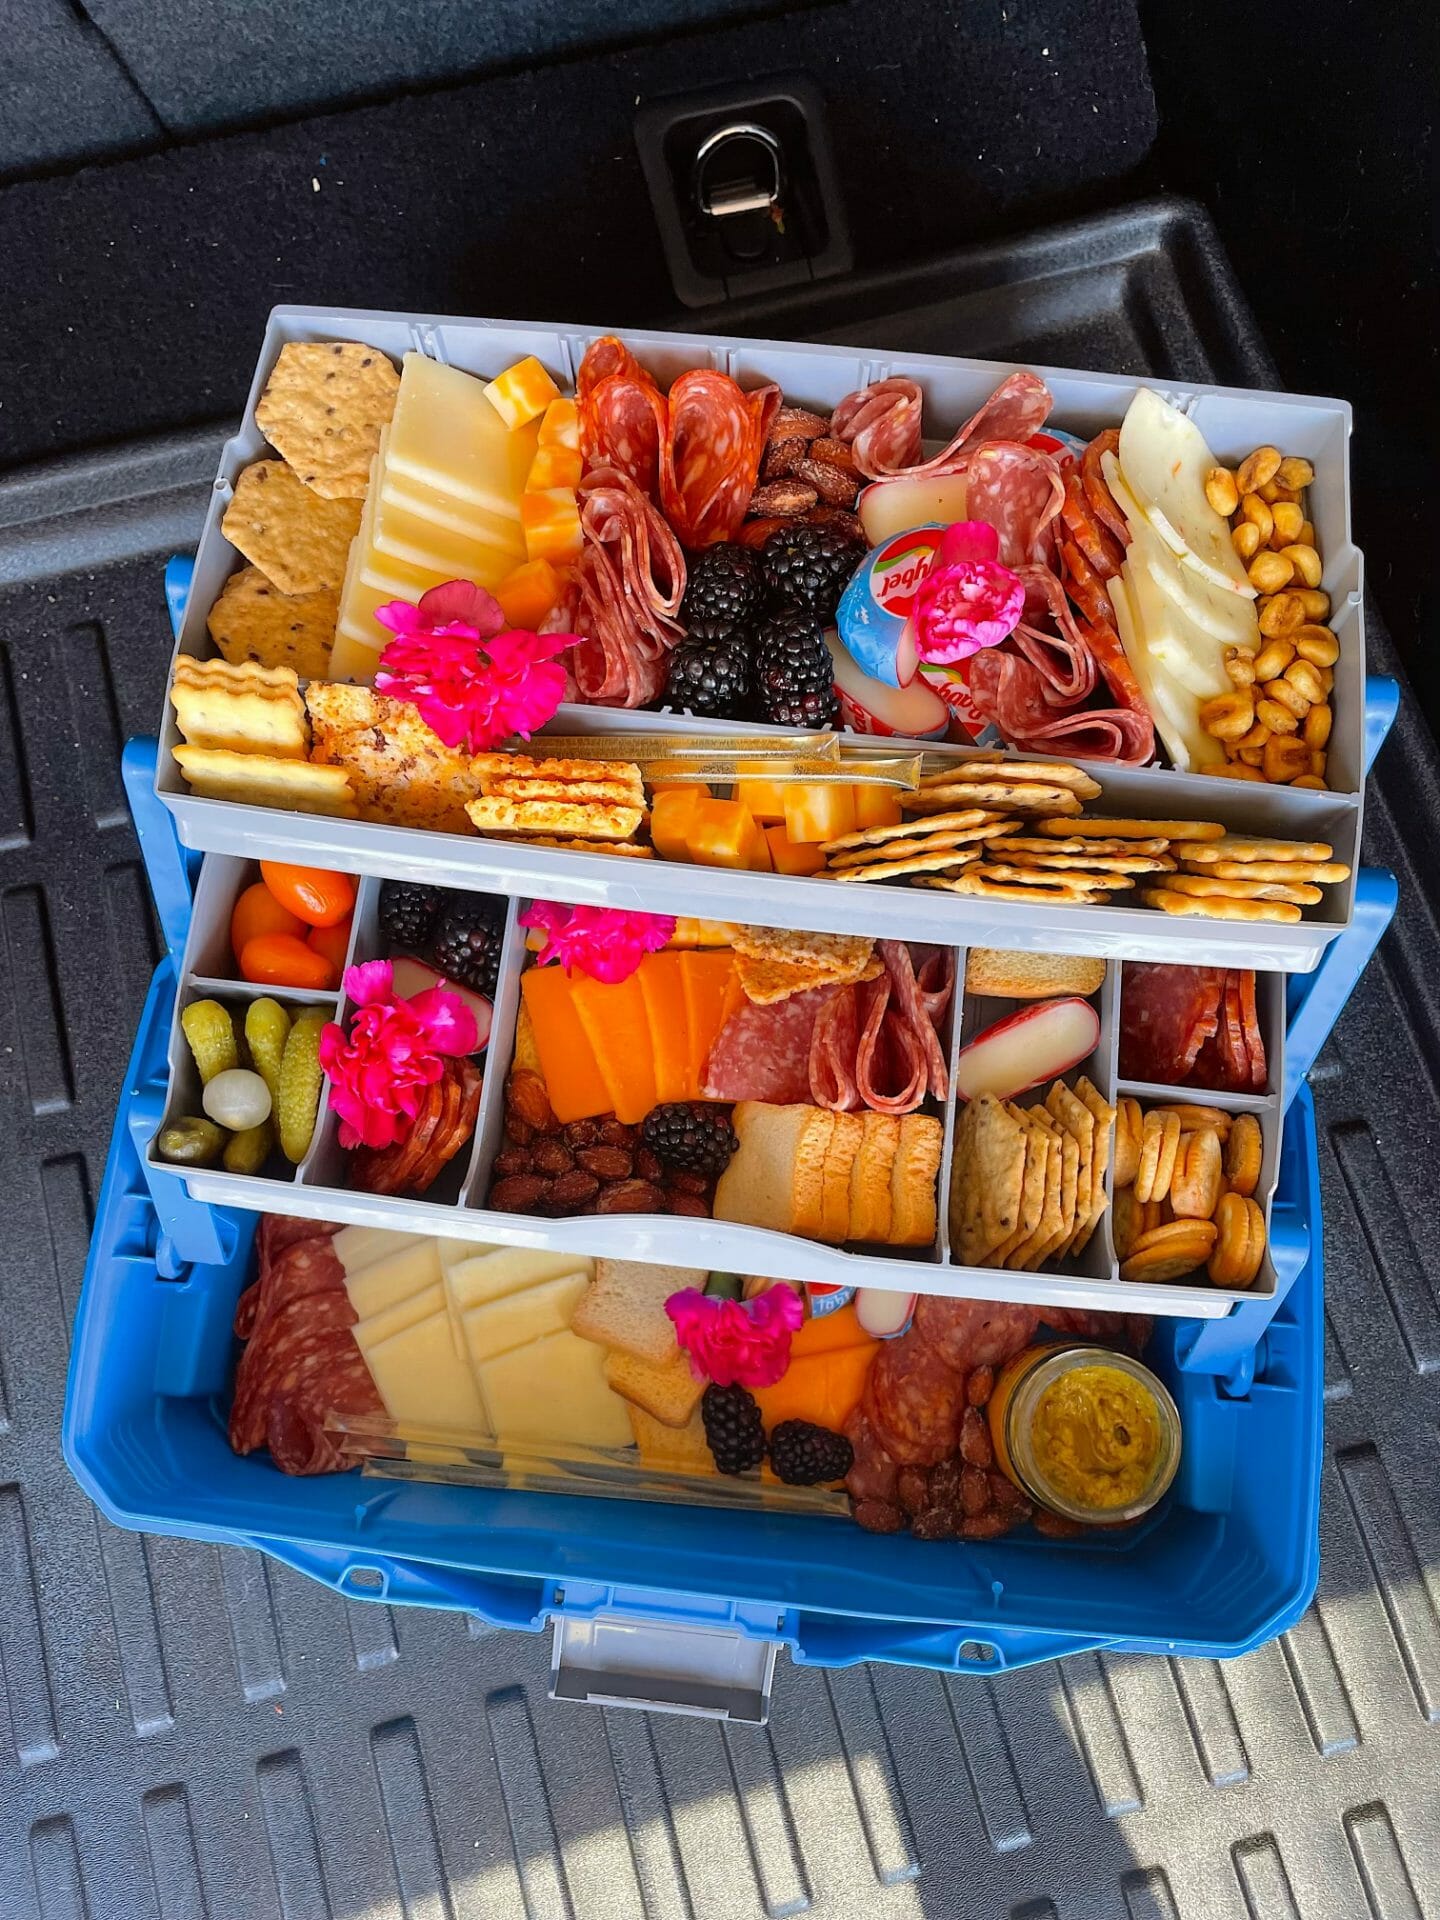 Charcuterie on the Go,snack Box, Snackle Box, Charcuterie Box